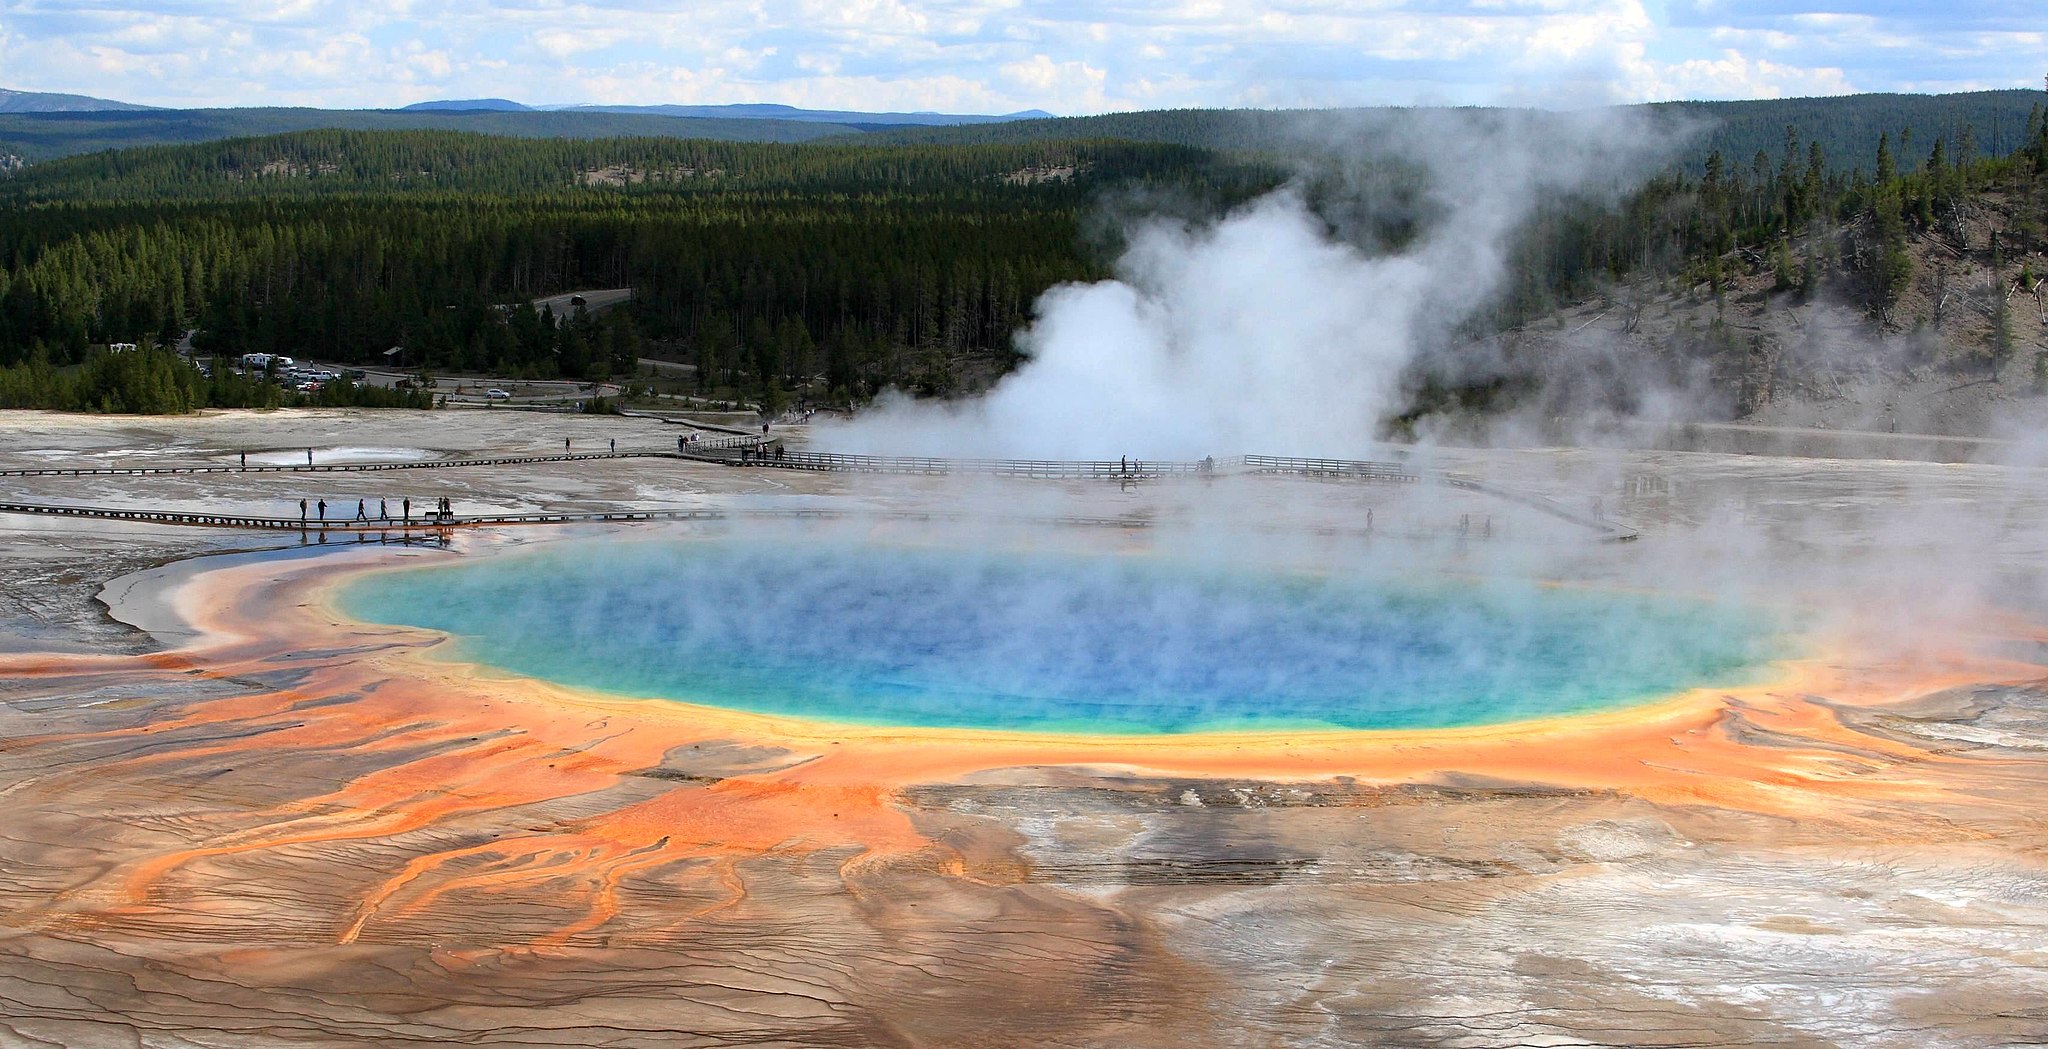 Yellowstone supervolcano has twice as much magma as expected

